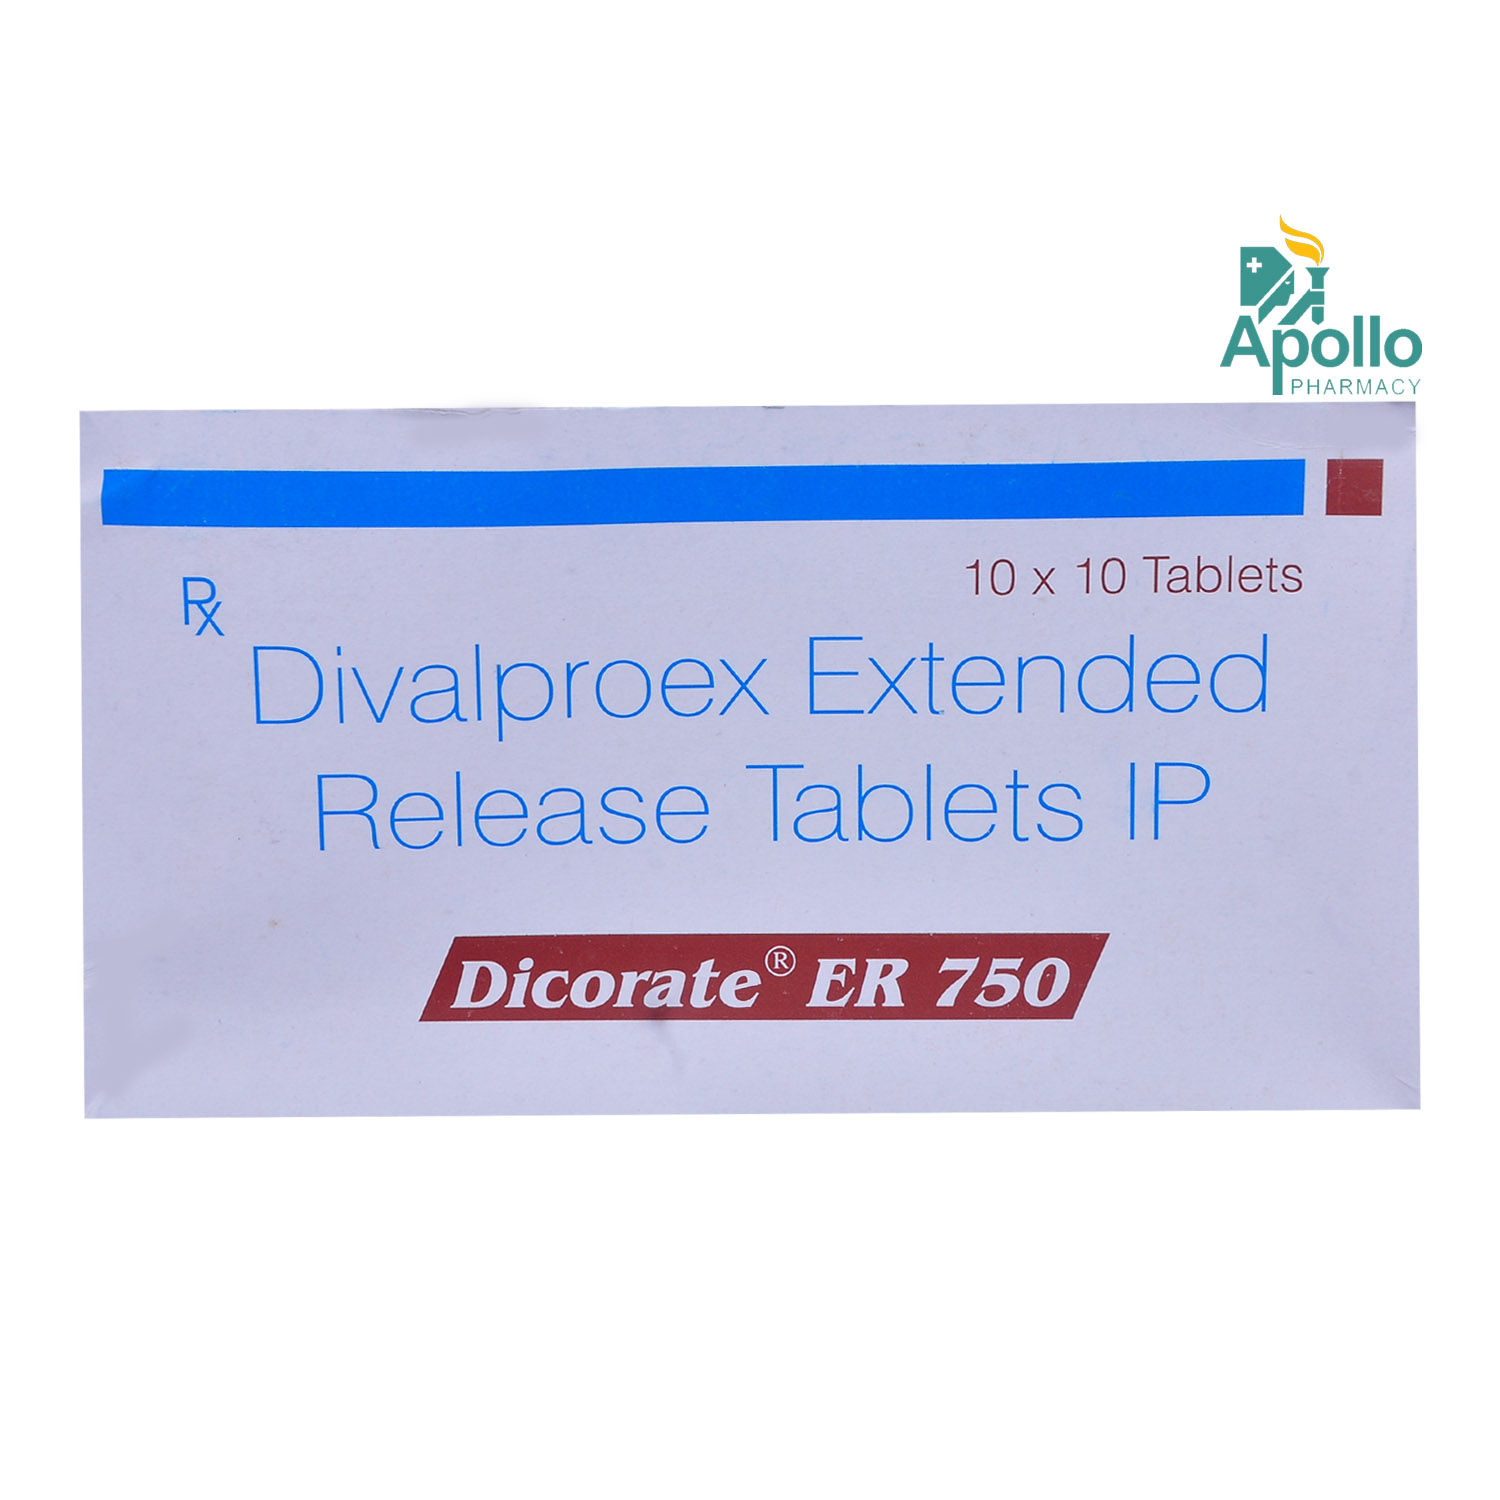 Dicorate ER 750 Tablet 10's, Pack of 10 TABLETS